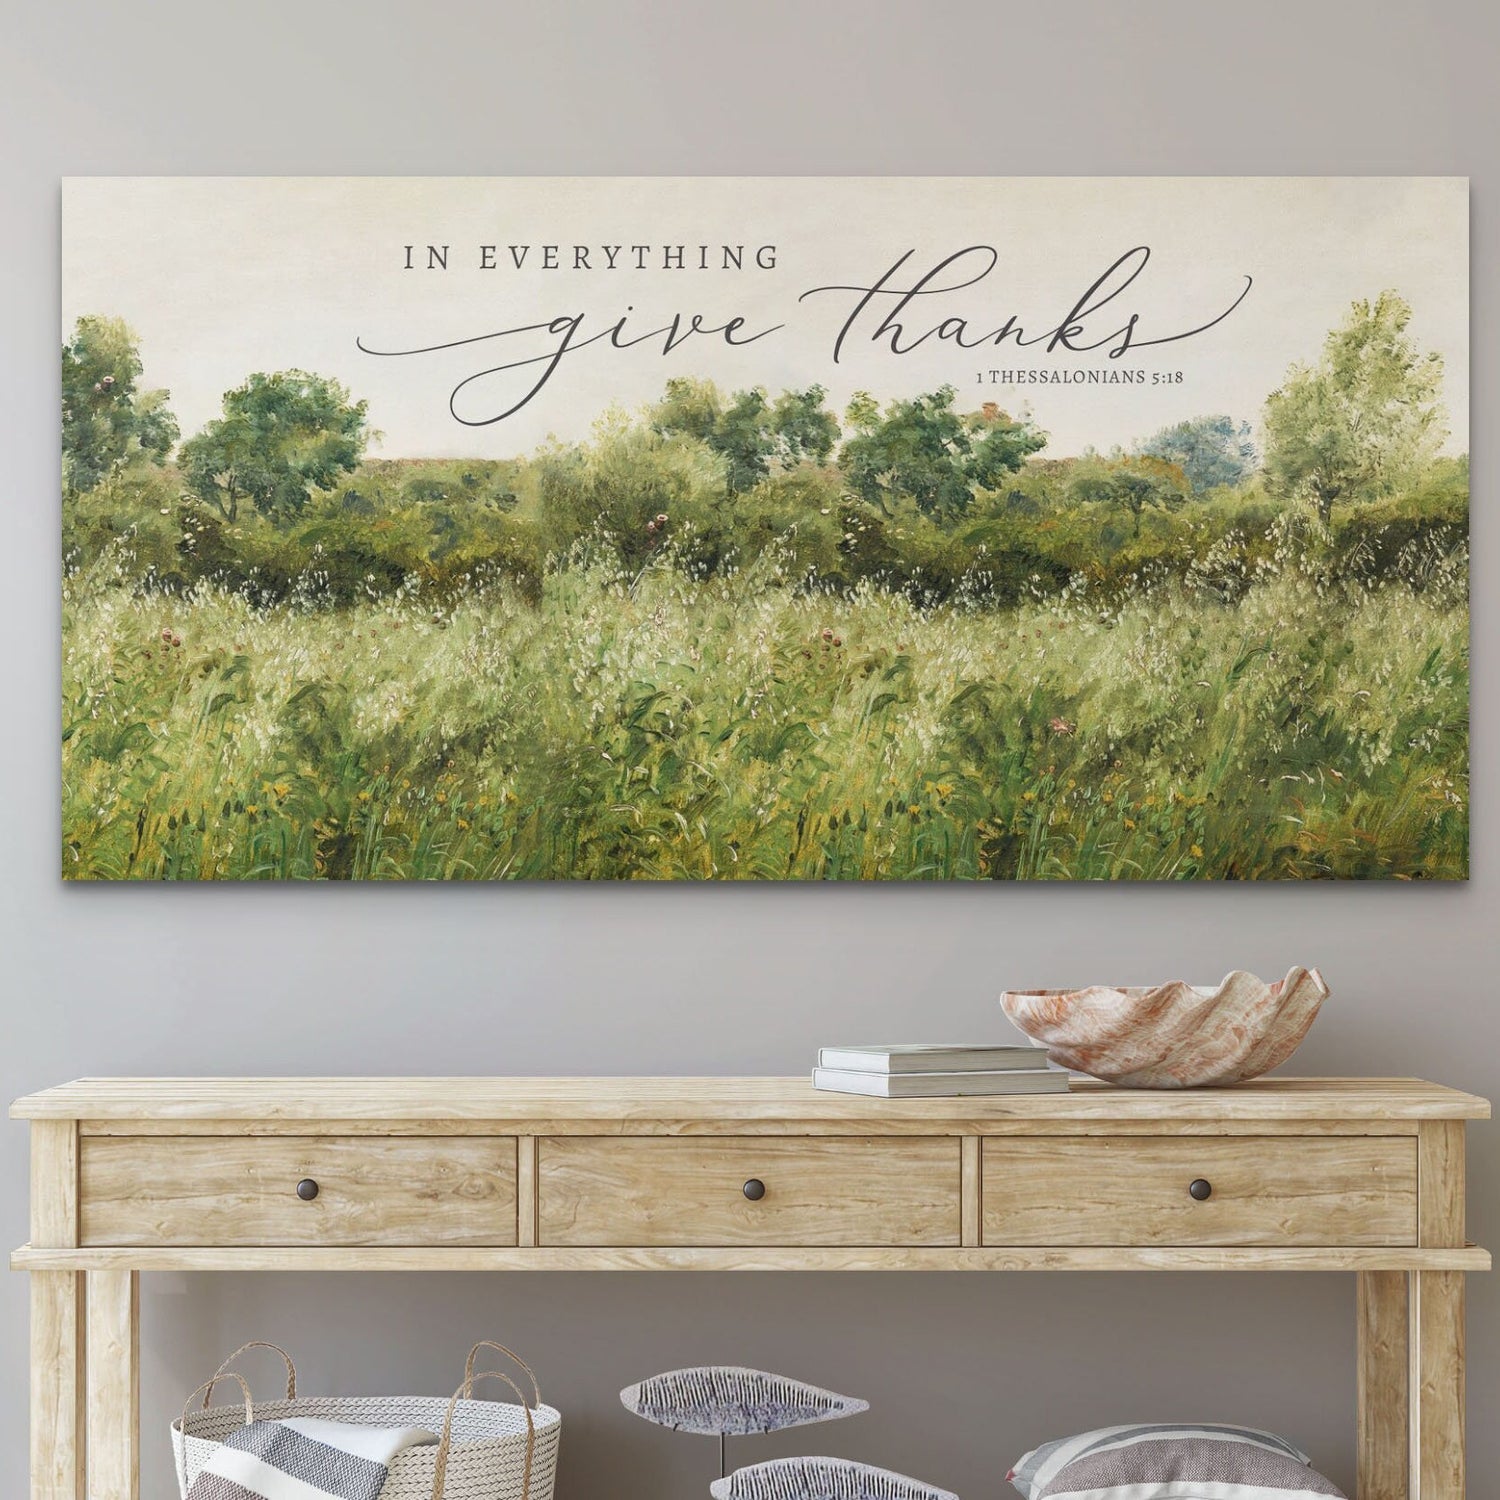 VINTAGE HOME DECOR, In Everything Give Thanks, Christian Wall Art, Thanksgiving Sign, Scripture Art, 1 Thessalonians 5:18 Vintage Home Décor